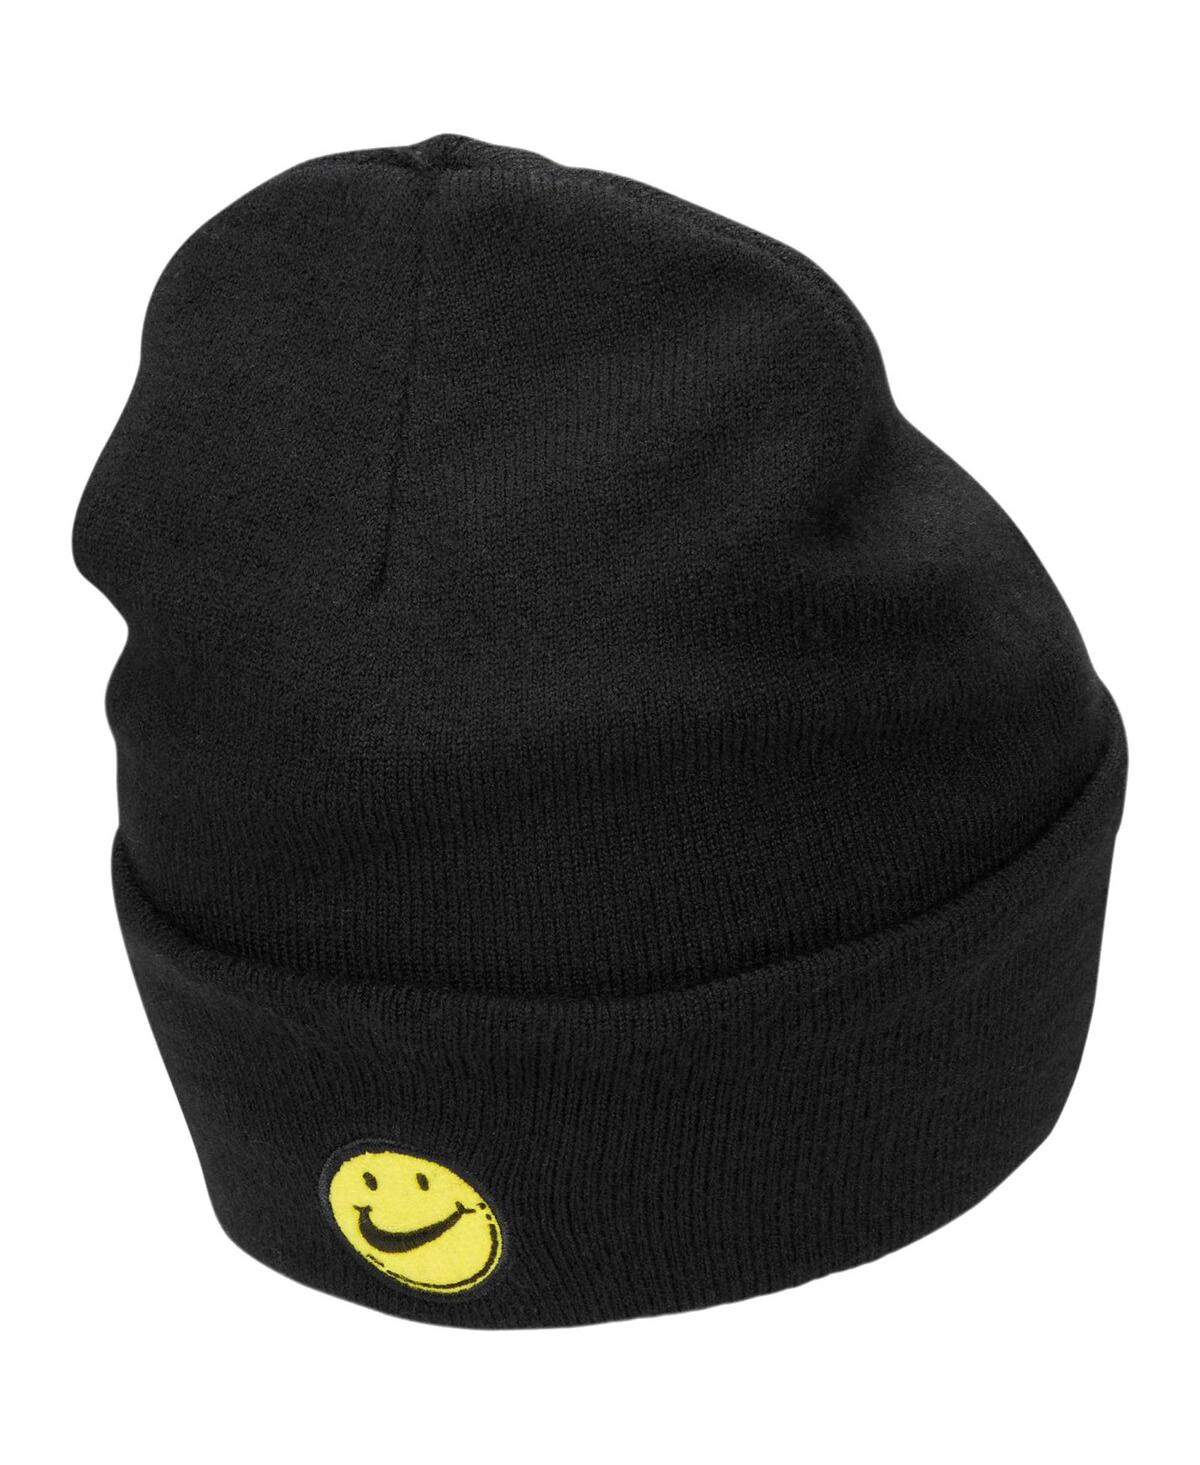 Shop Nike Youth Boys And Girls  Black Reversible Smiley Tall Peak Cuffed Knit Hat